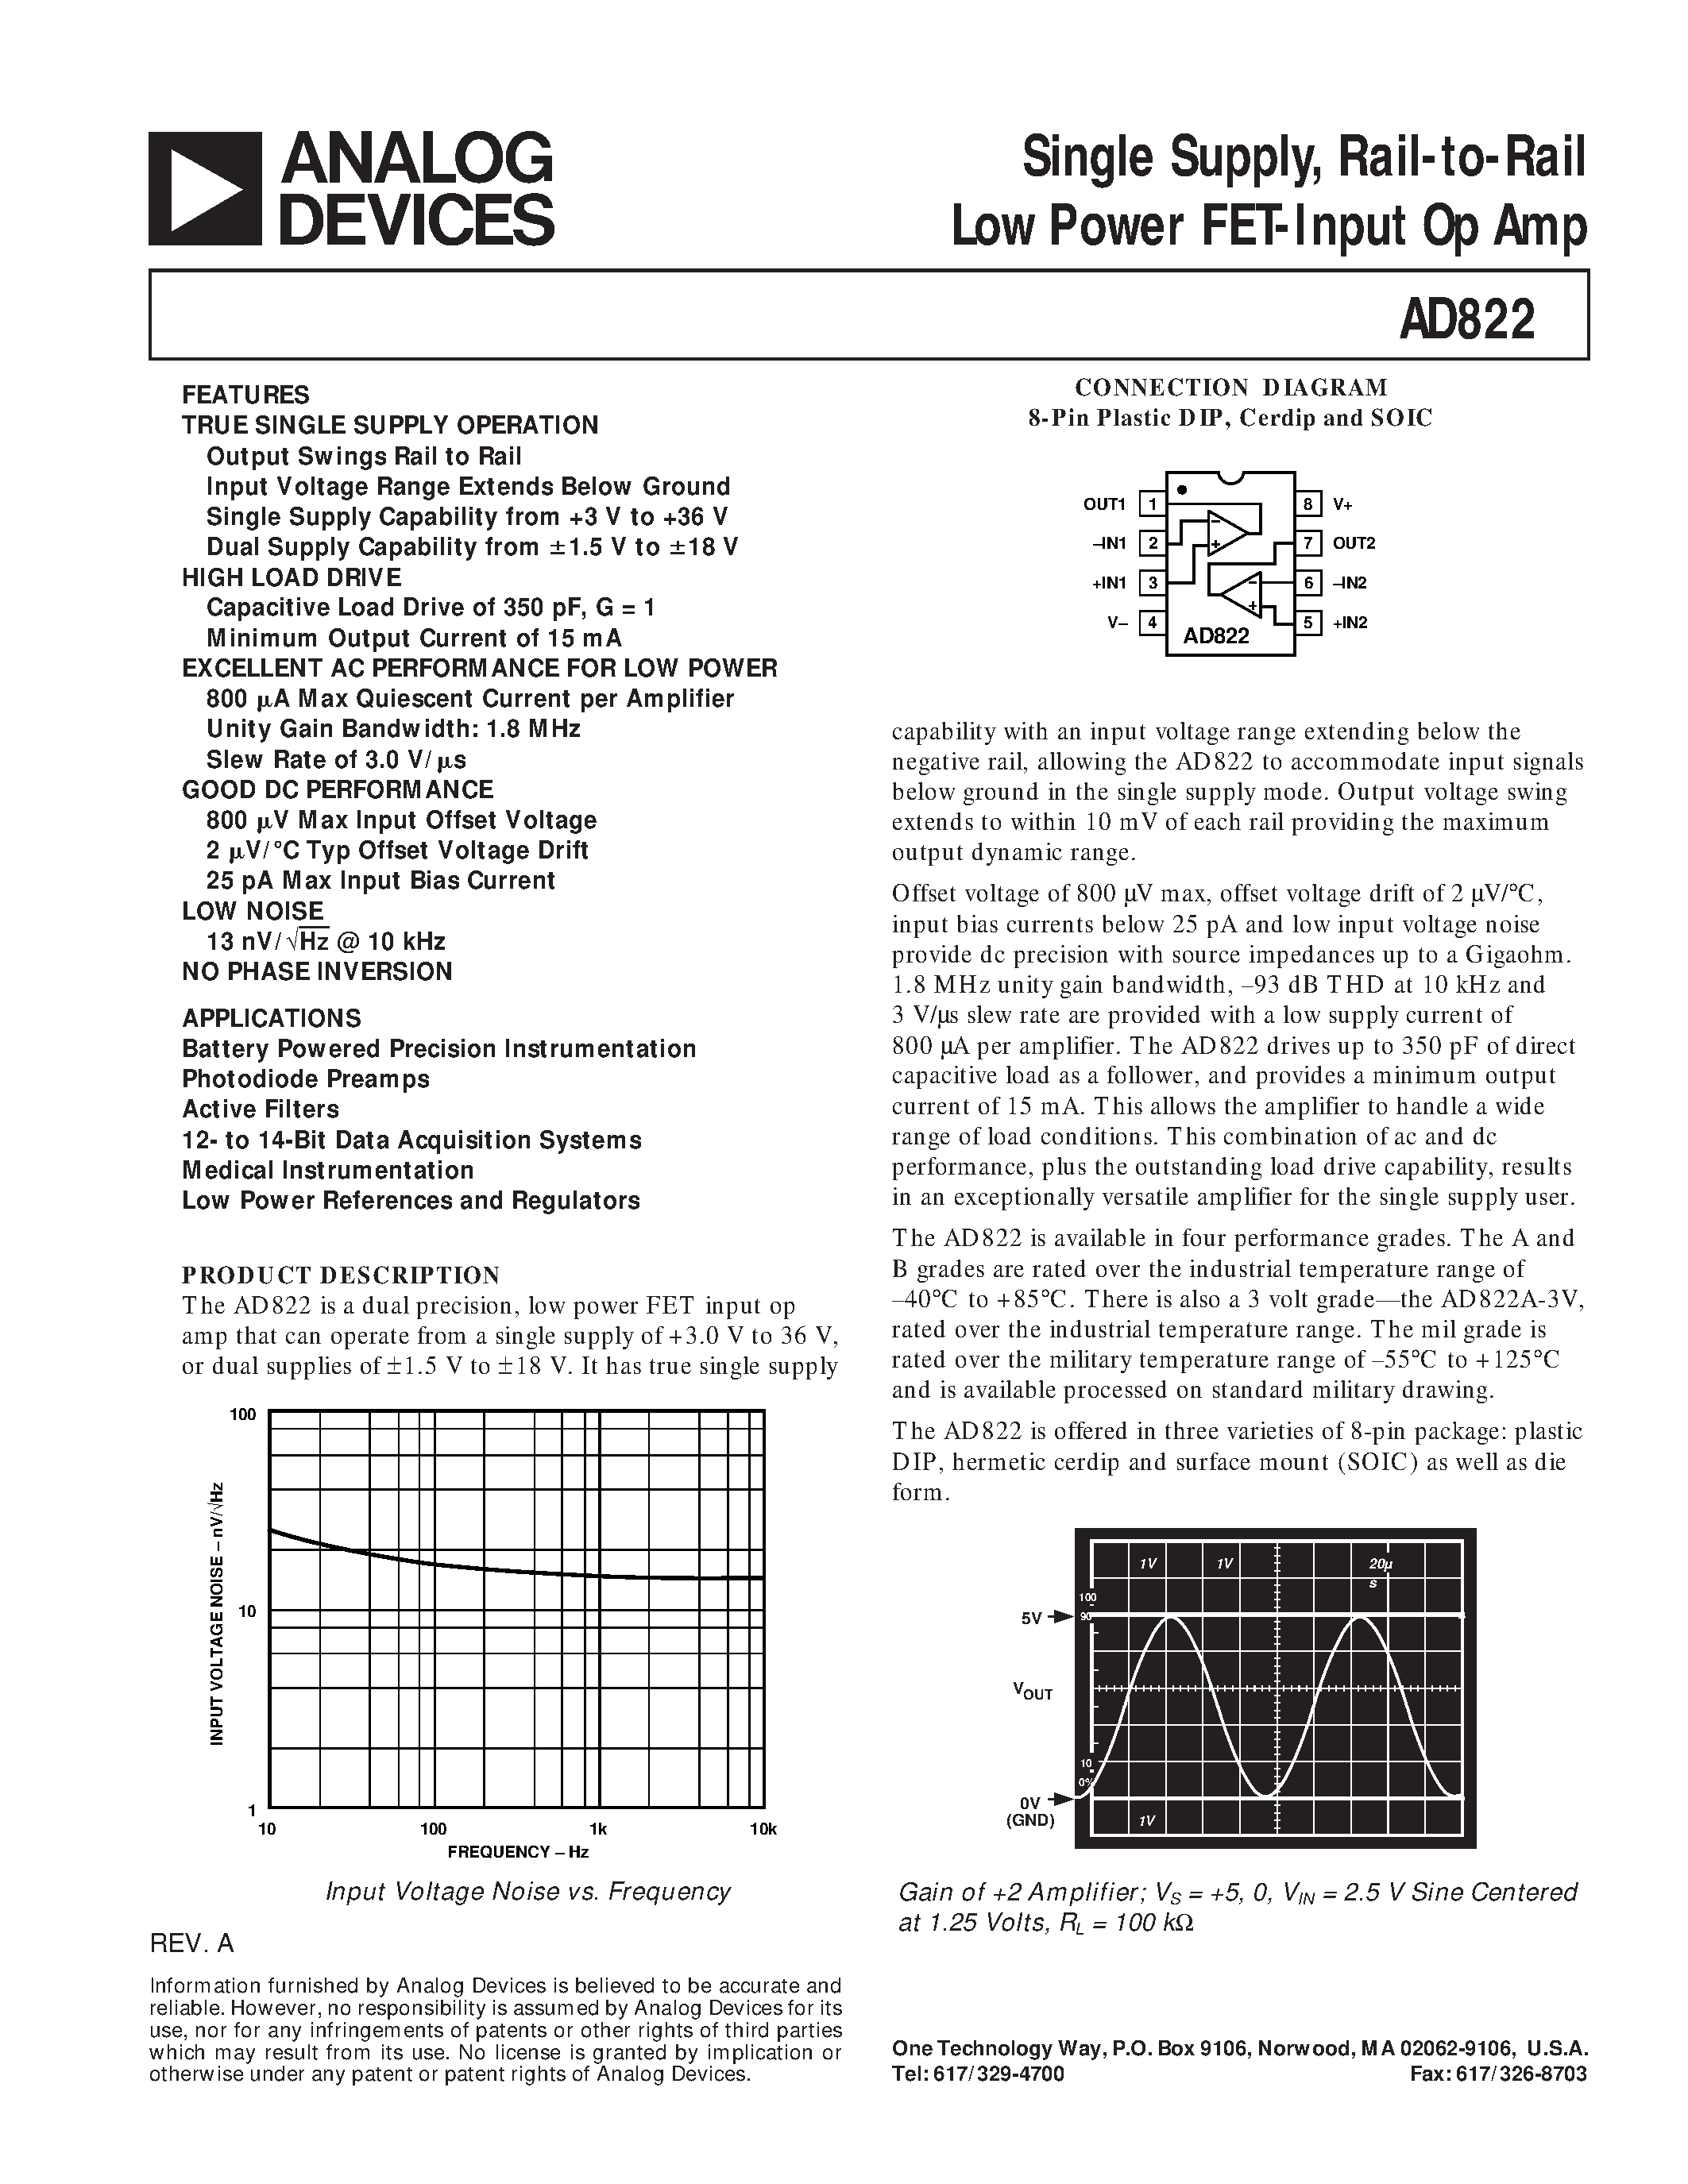 Datasheet AD822AChips - Single Supply/ Rail-to-Rail Low Power FET-Input Op Amp page 1